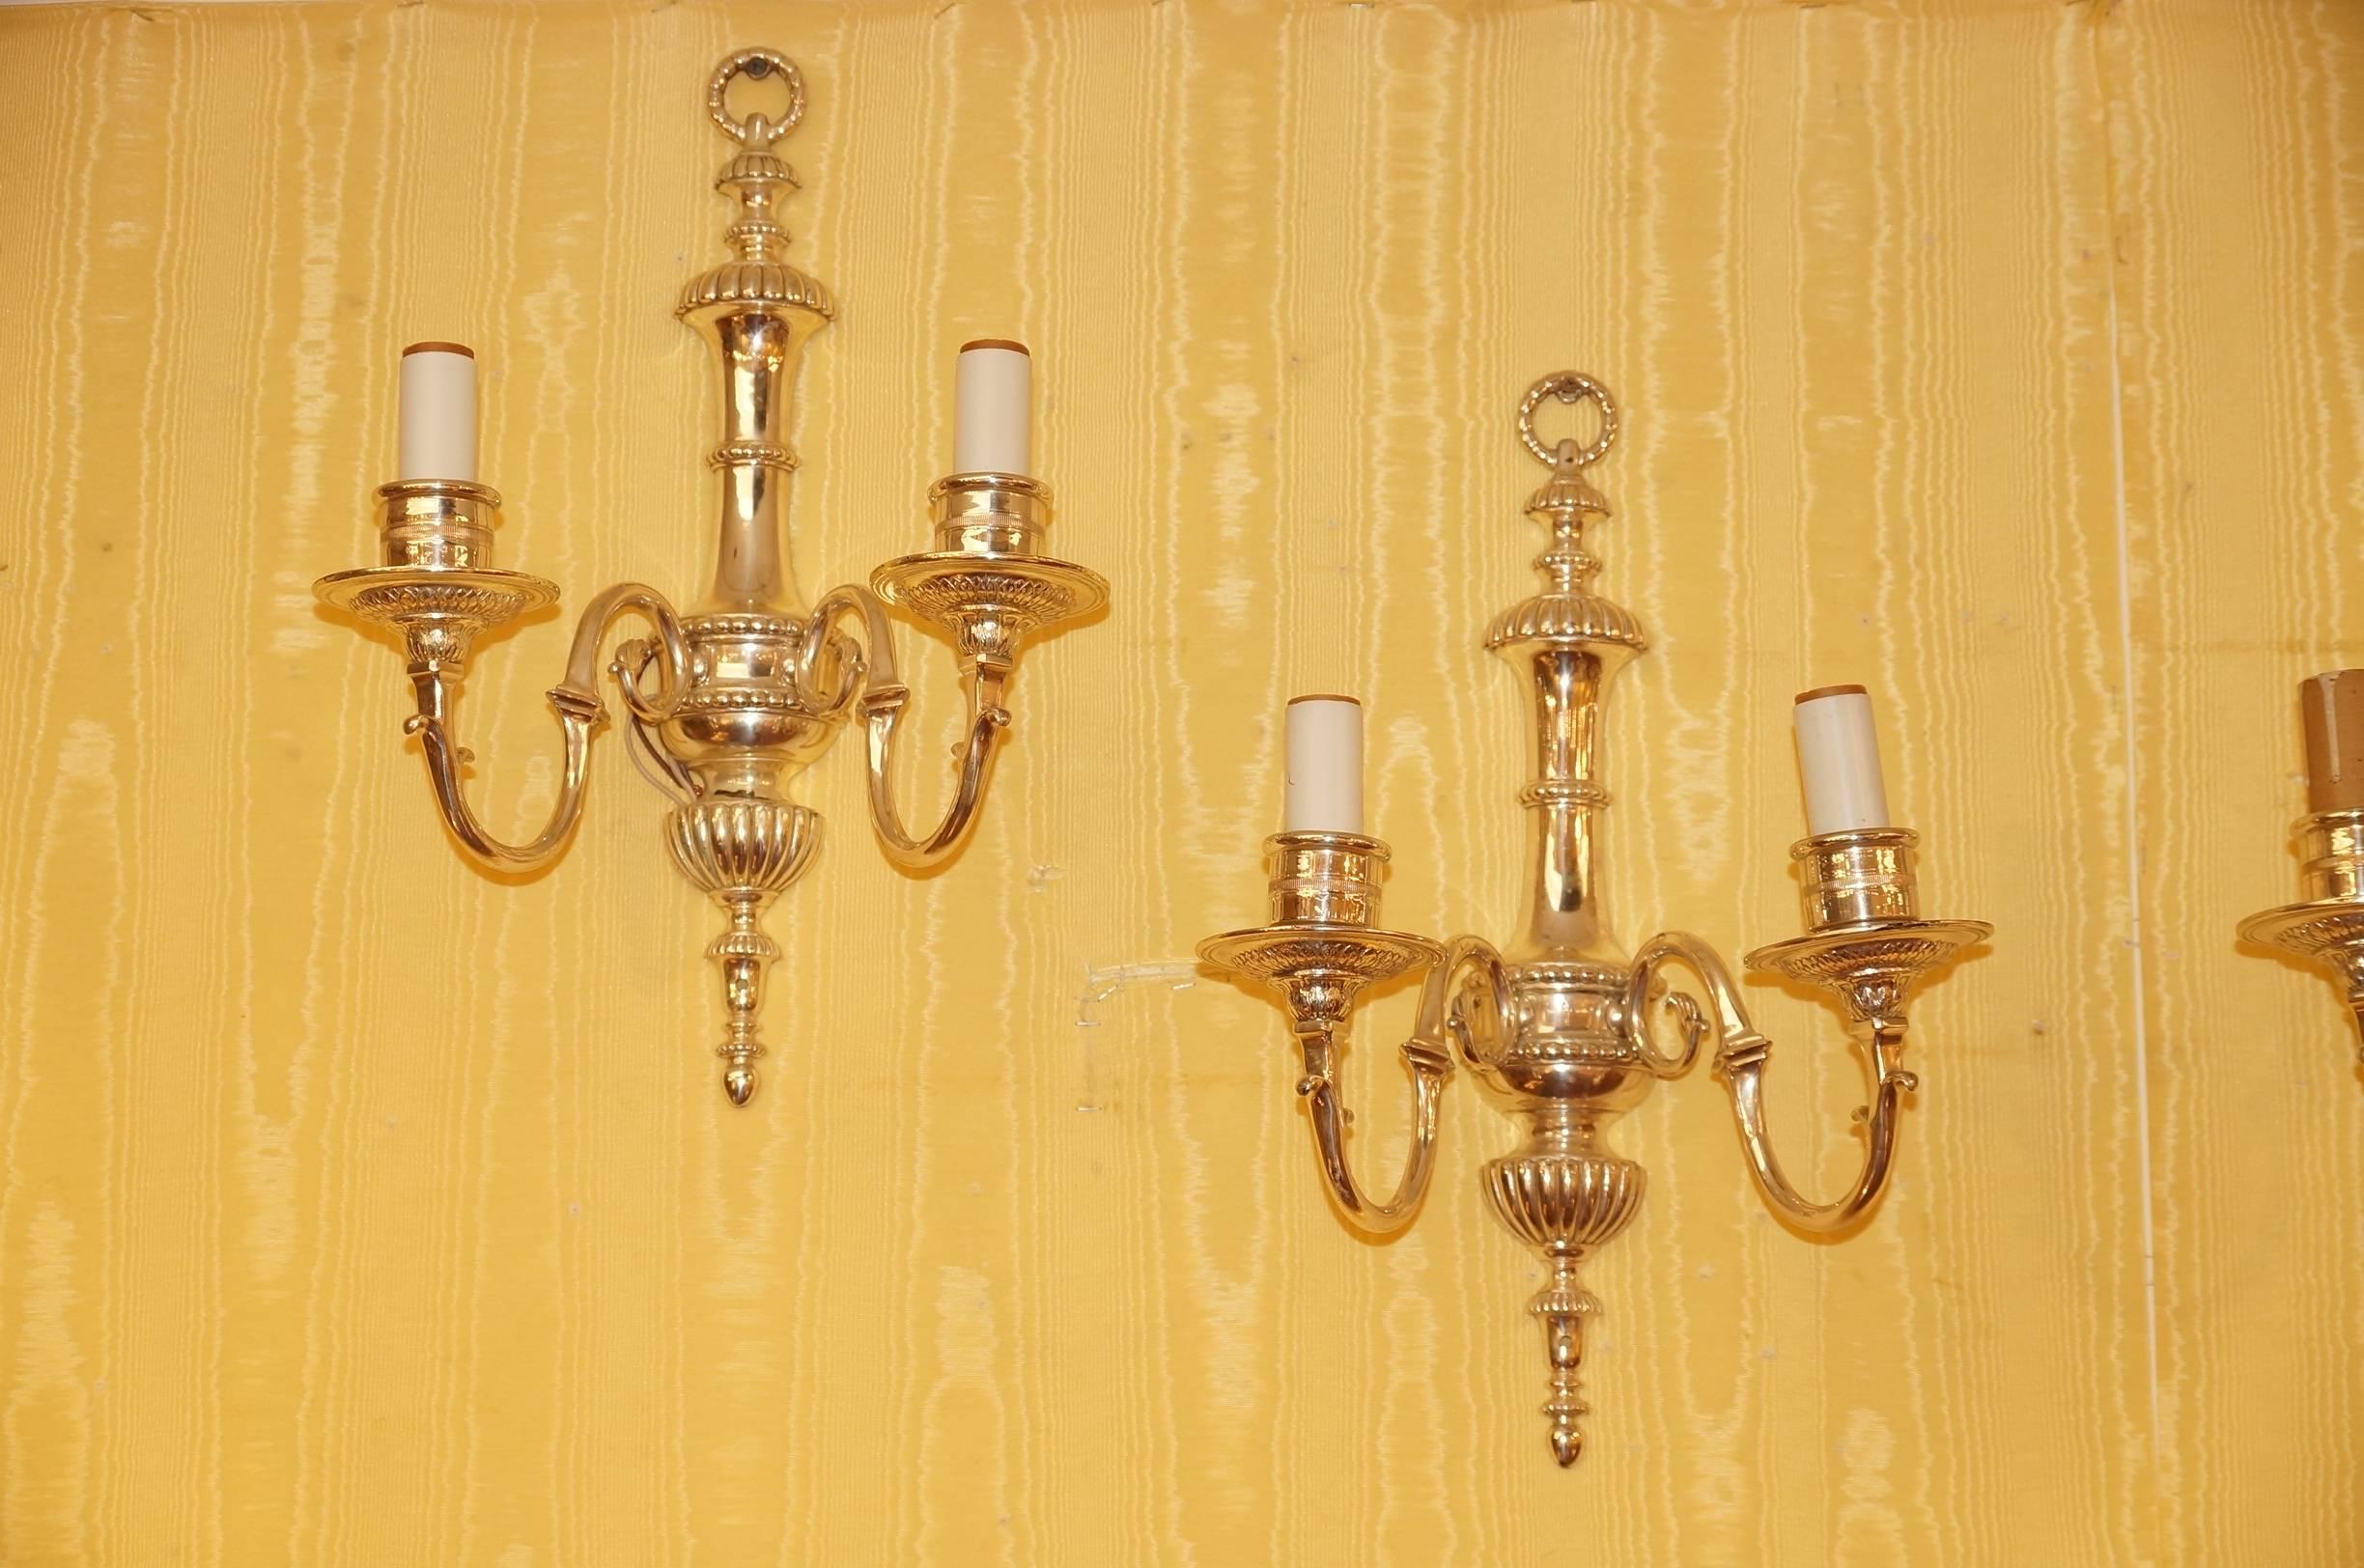 Set of four Caldwell style silvered metal two-arm wall light sconces.
Stock Number: LS20